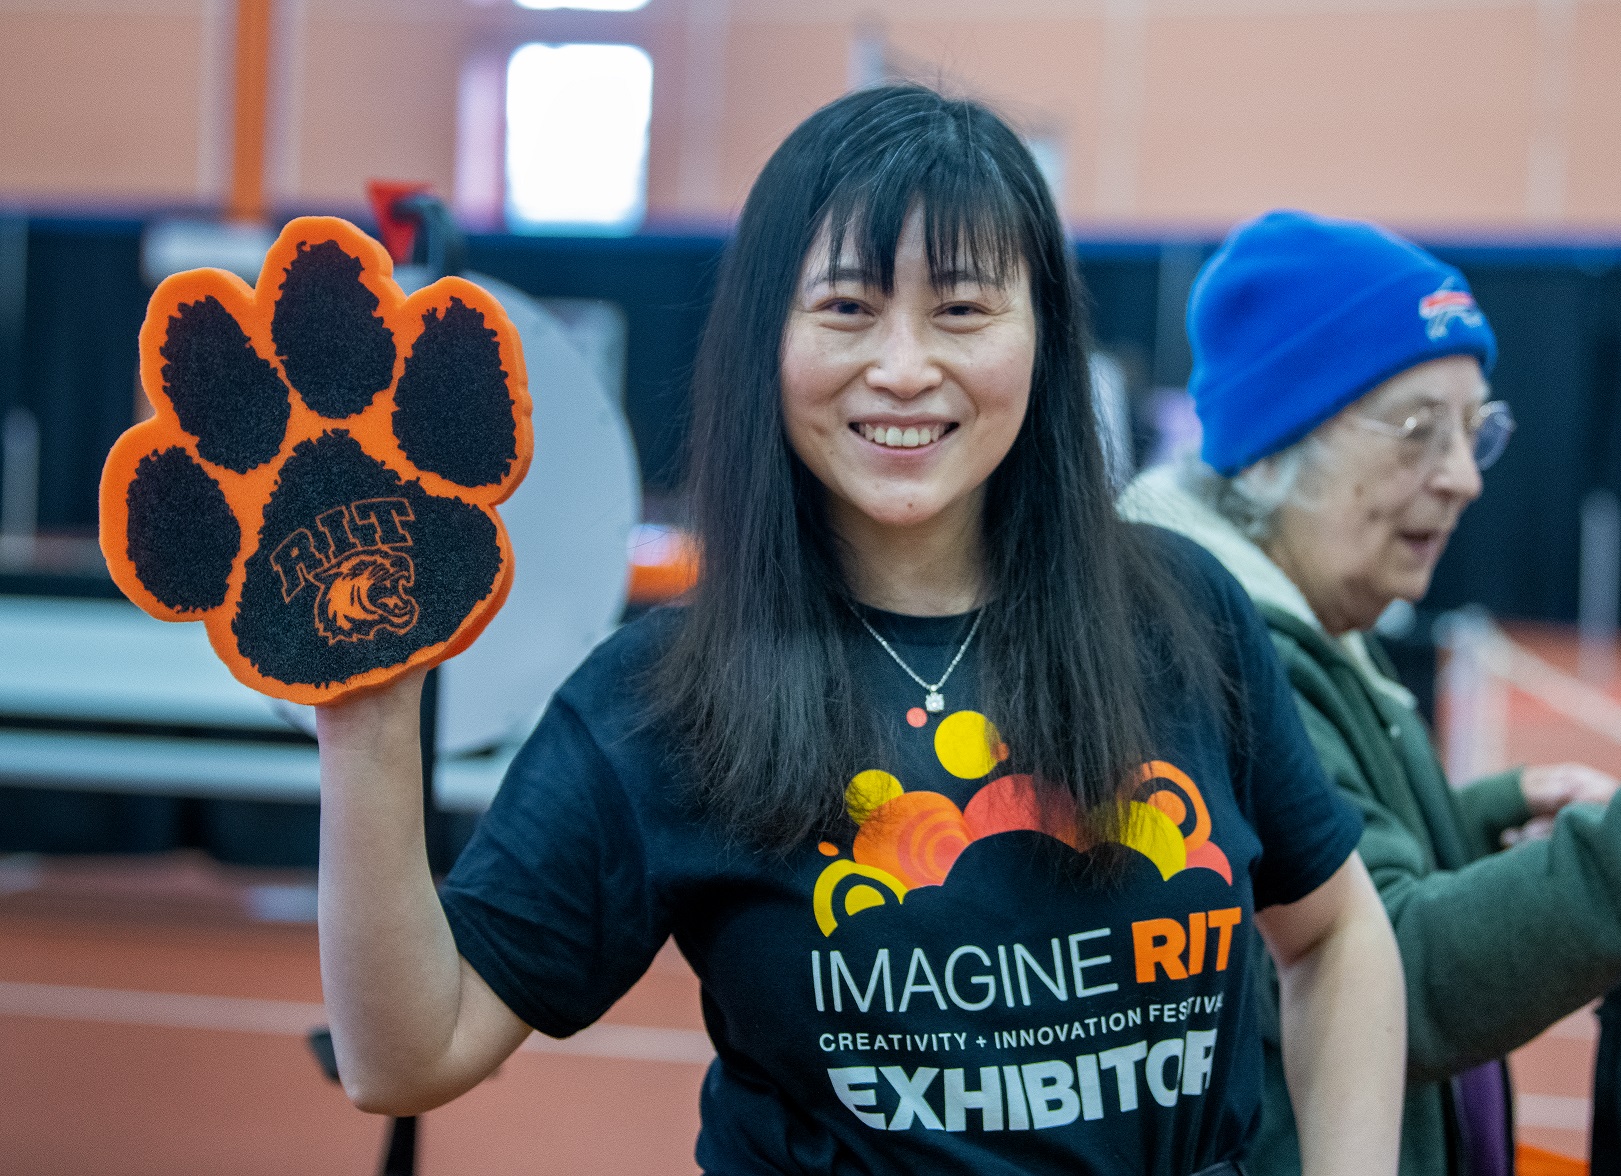 a photo of a person wearing an Imagine RIT t-shirt and holding up a foam paw